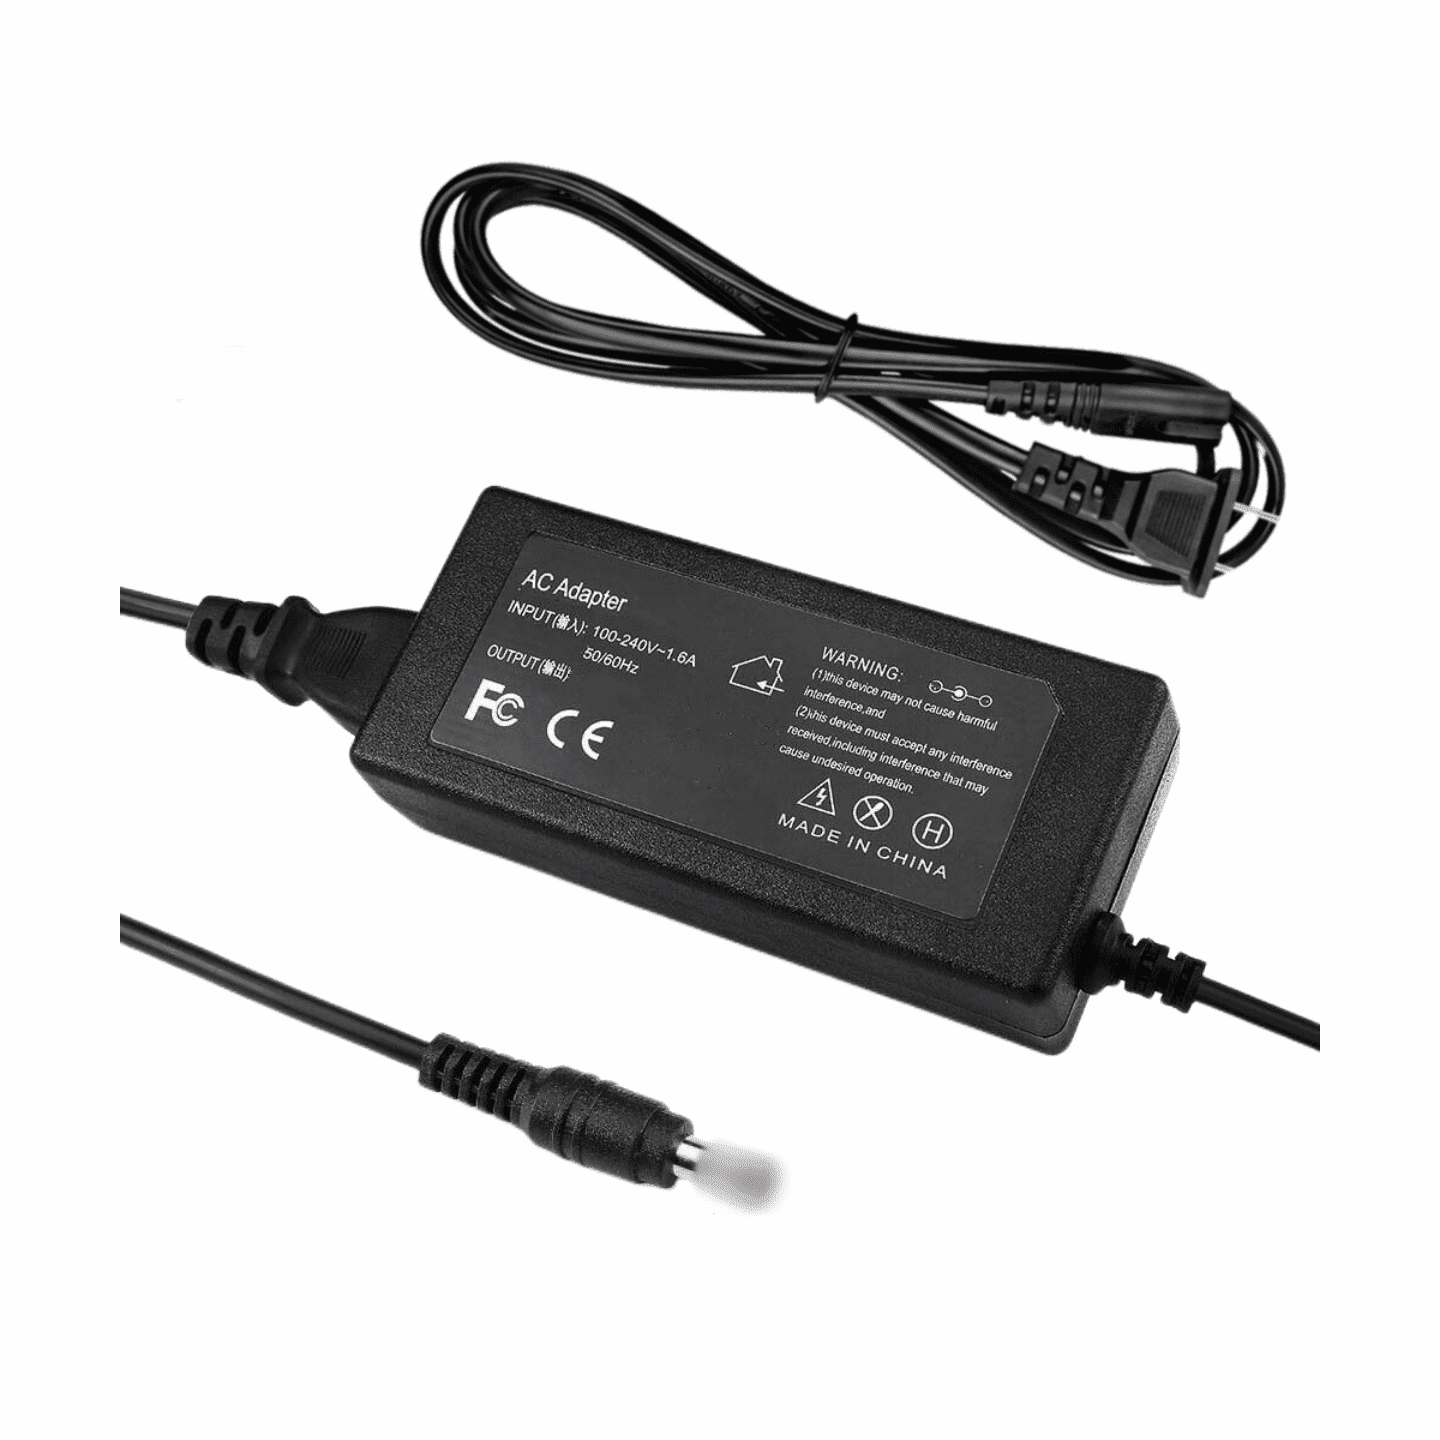 10Ft AC/DC Adapter Compatible with S-00118 UE Air Wireless Speaker & Recharging iPod Dock Power Supply Cord Cable PS Charger Input: 100-240 VAC 50/60Hz Worldwide Voltage Use Mains - Walmart.com